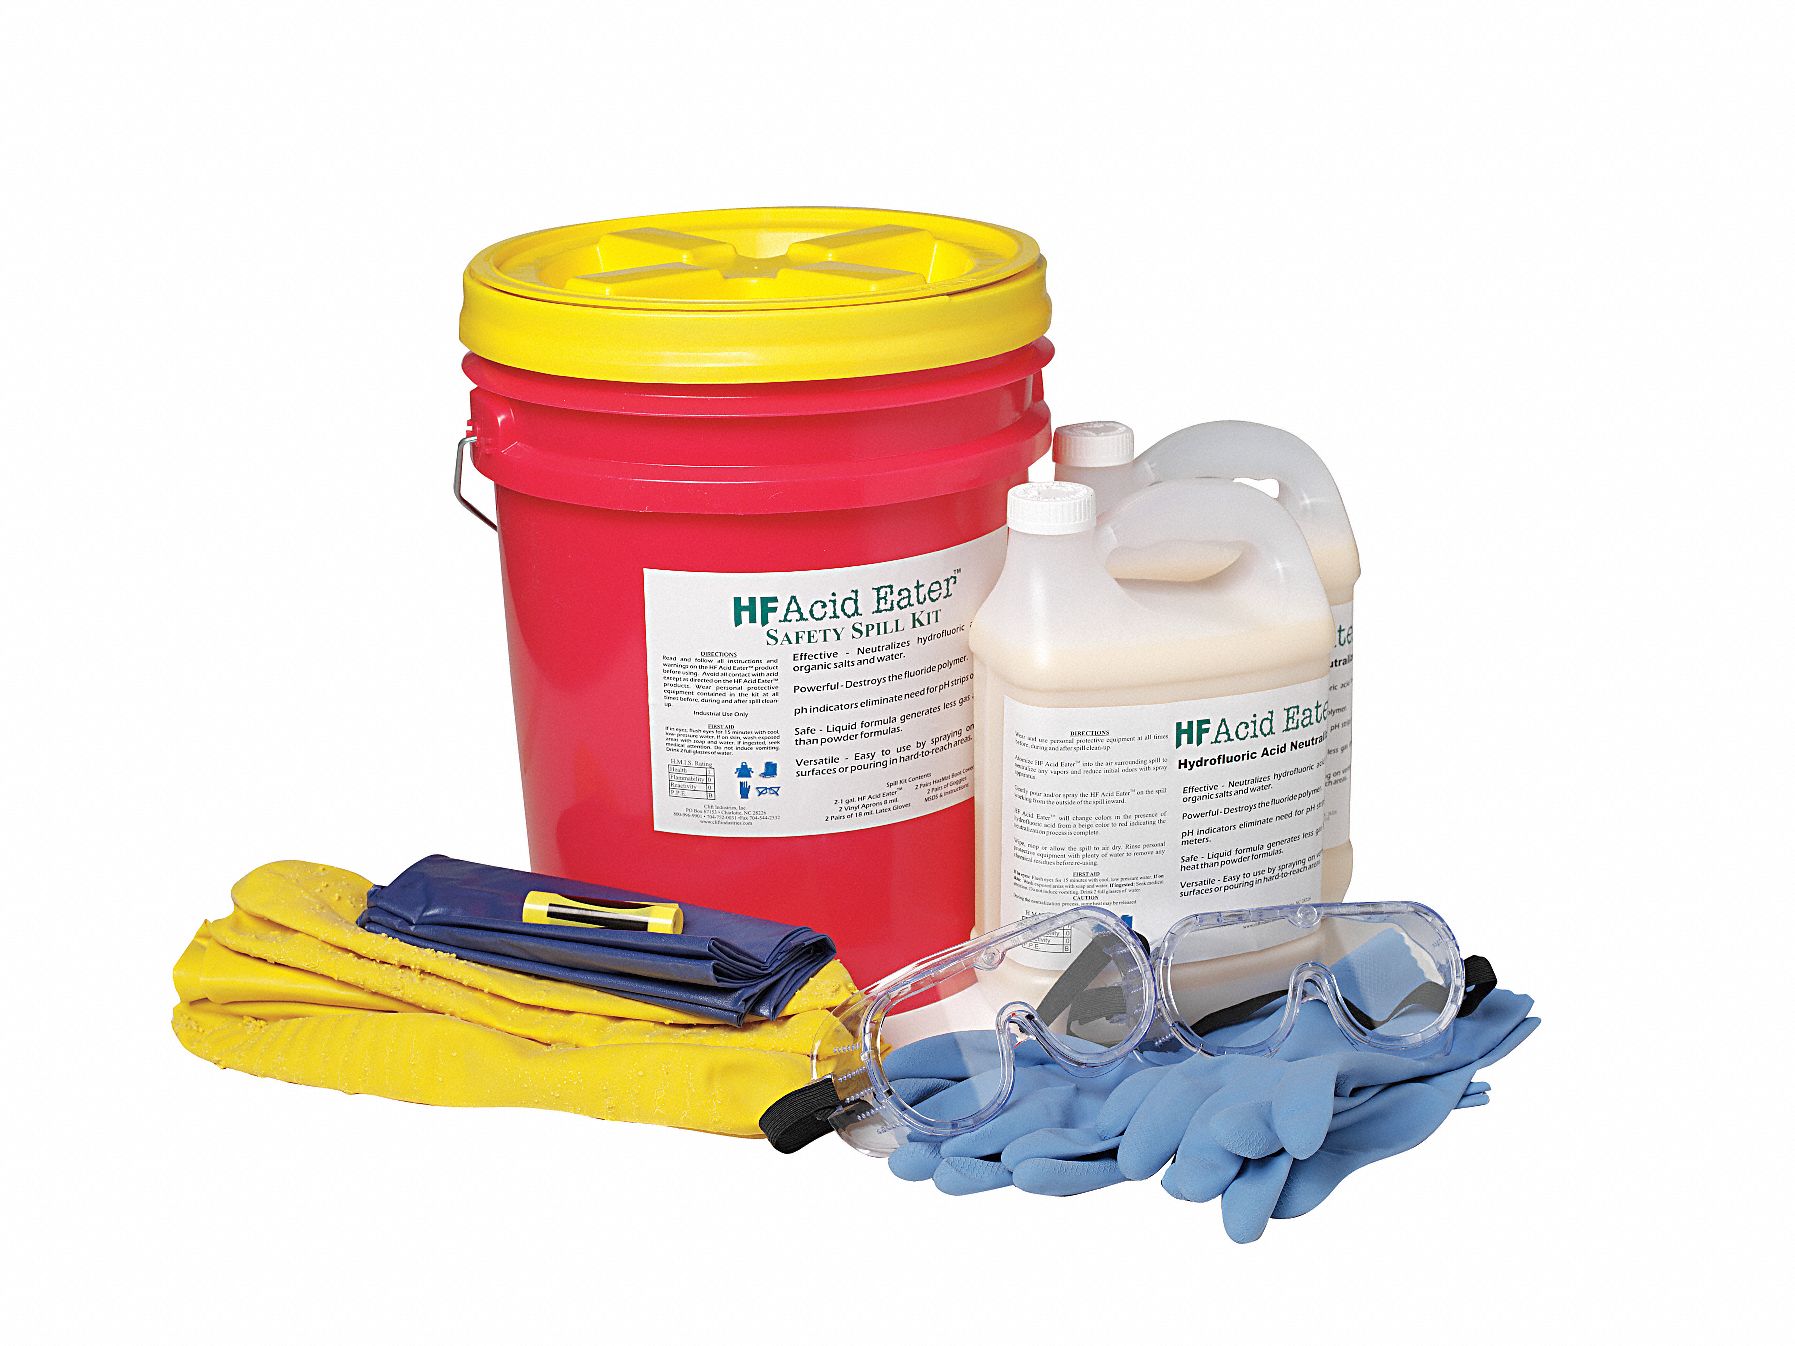 Spill Kit,  Fluids Absorbed Hydrofluoric Acid,  Container Type Bucket,  2 gal Container Capacity